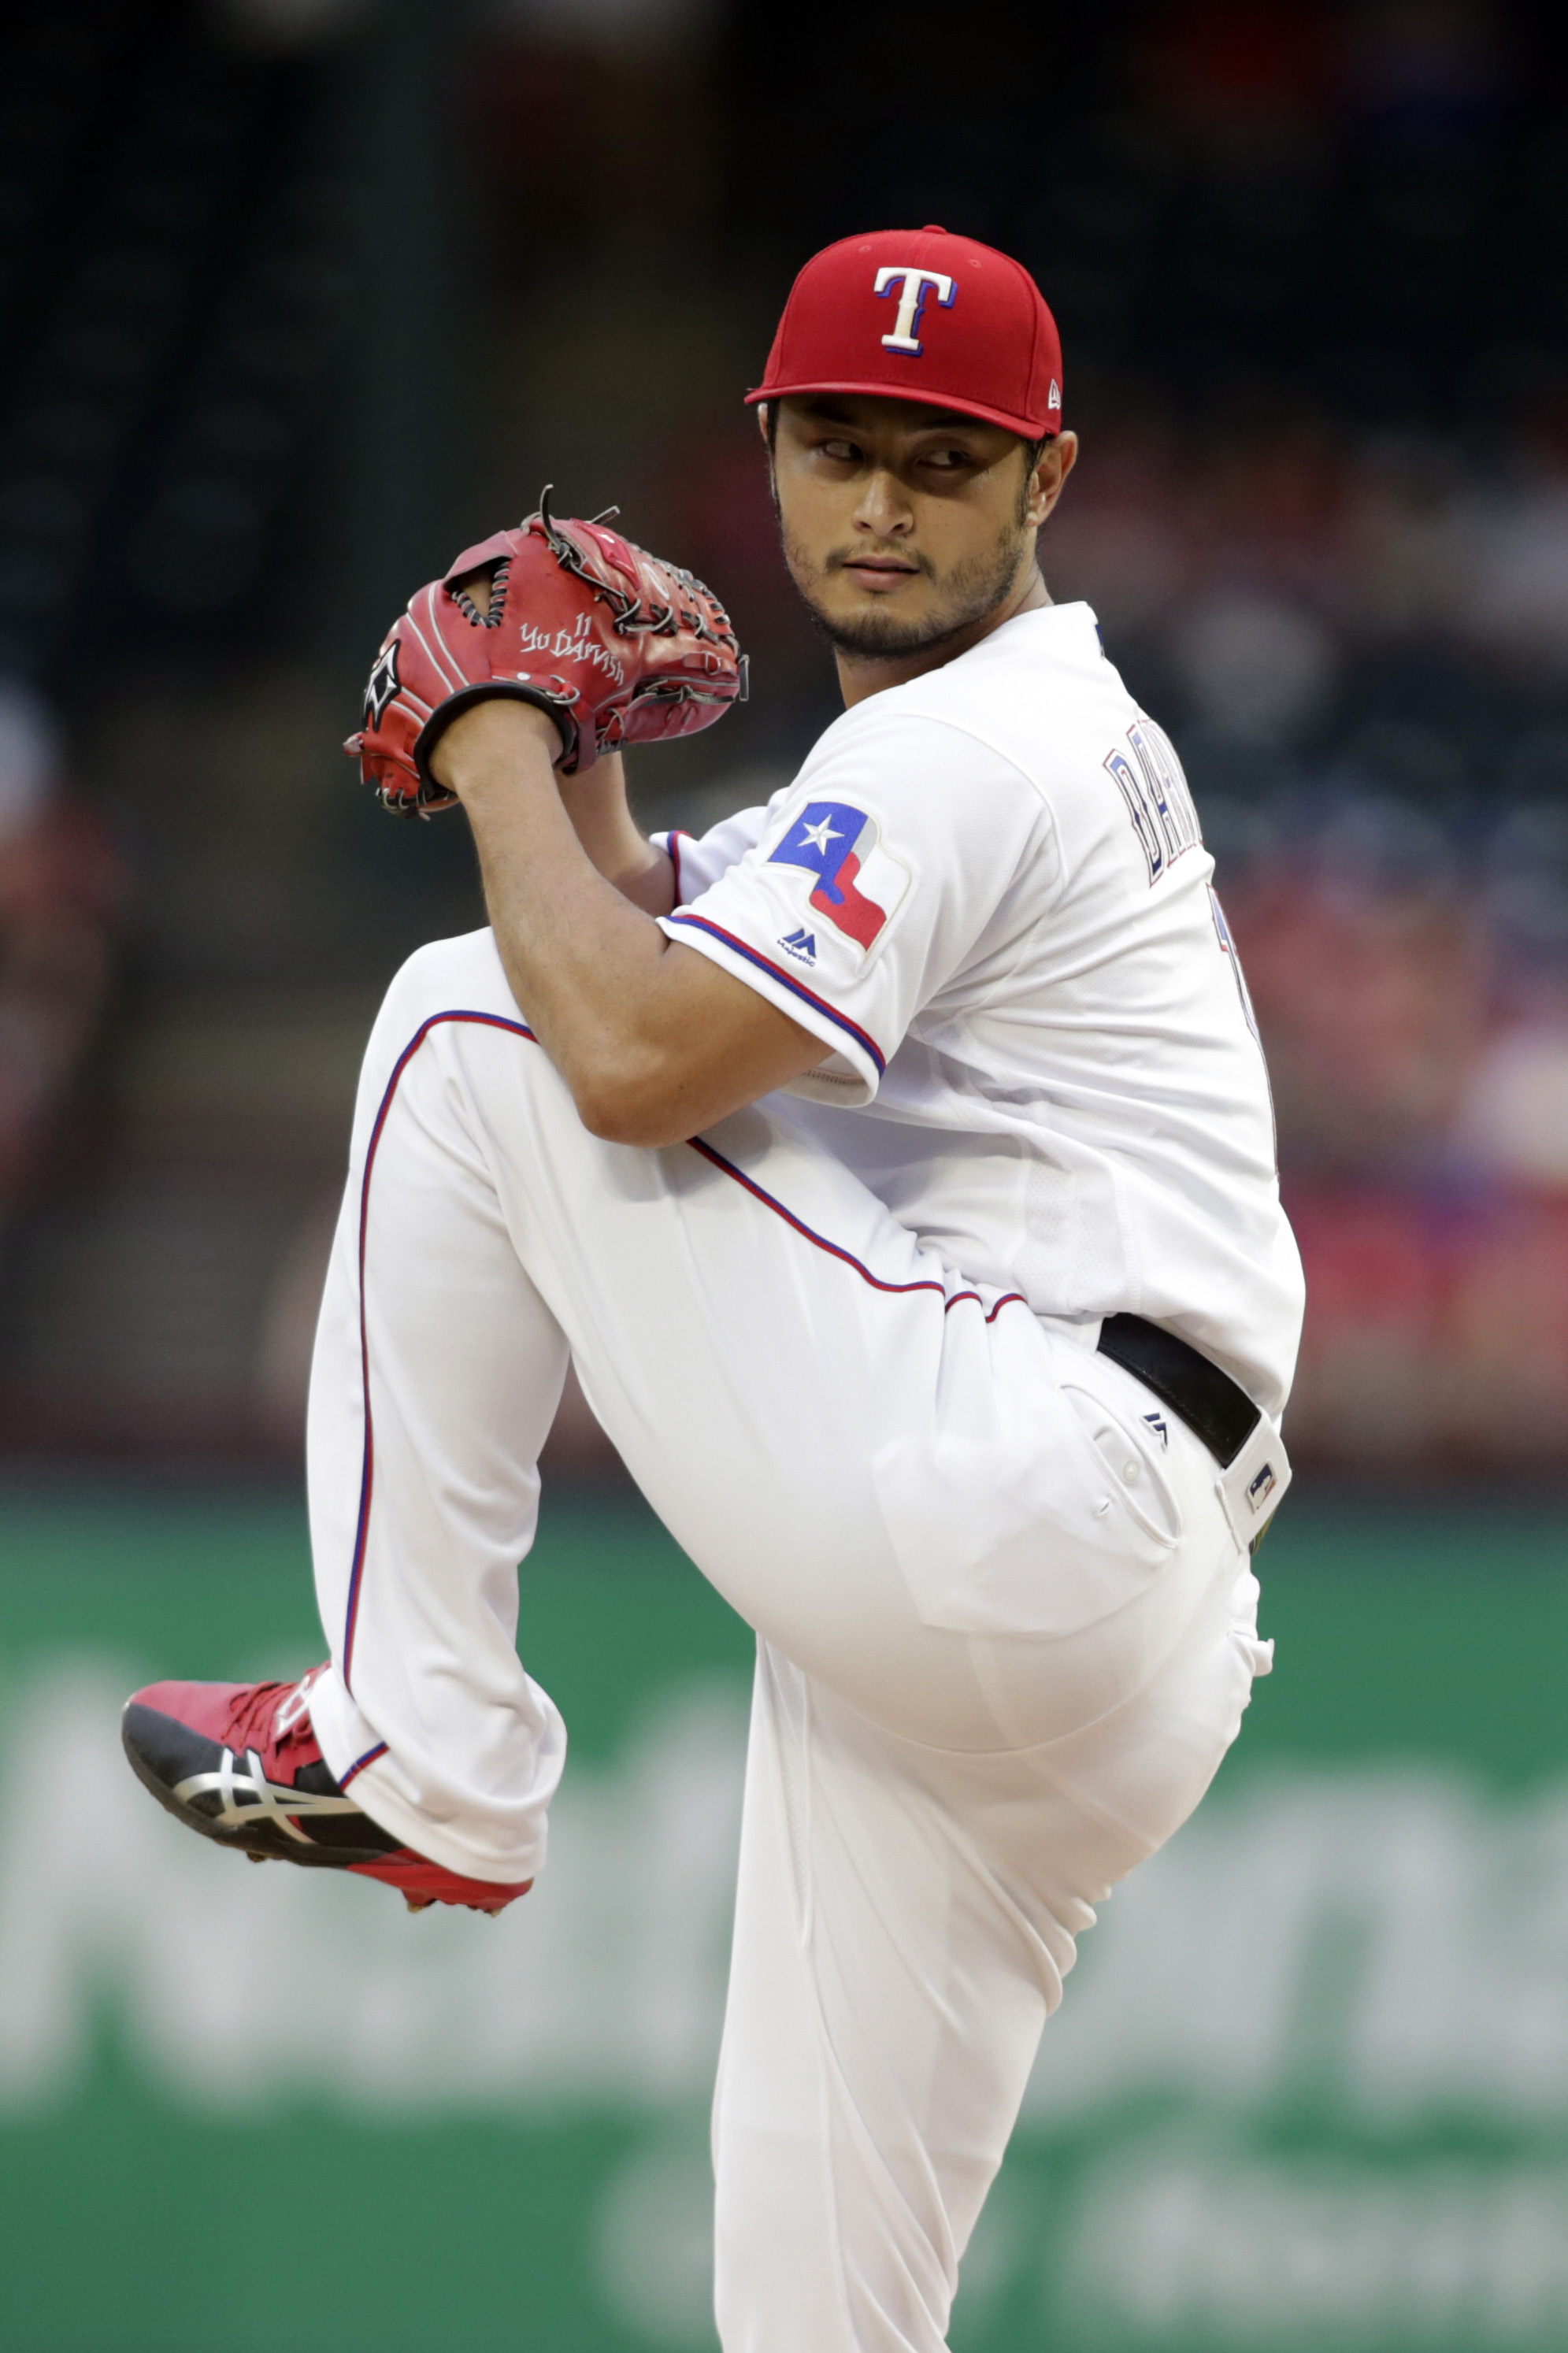 Looking For A Match In A Yu Darvish Trade - MLB Trade Rumors